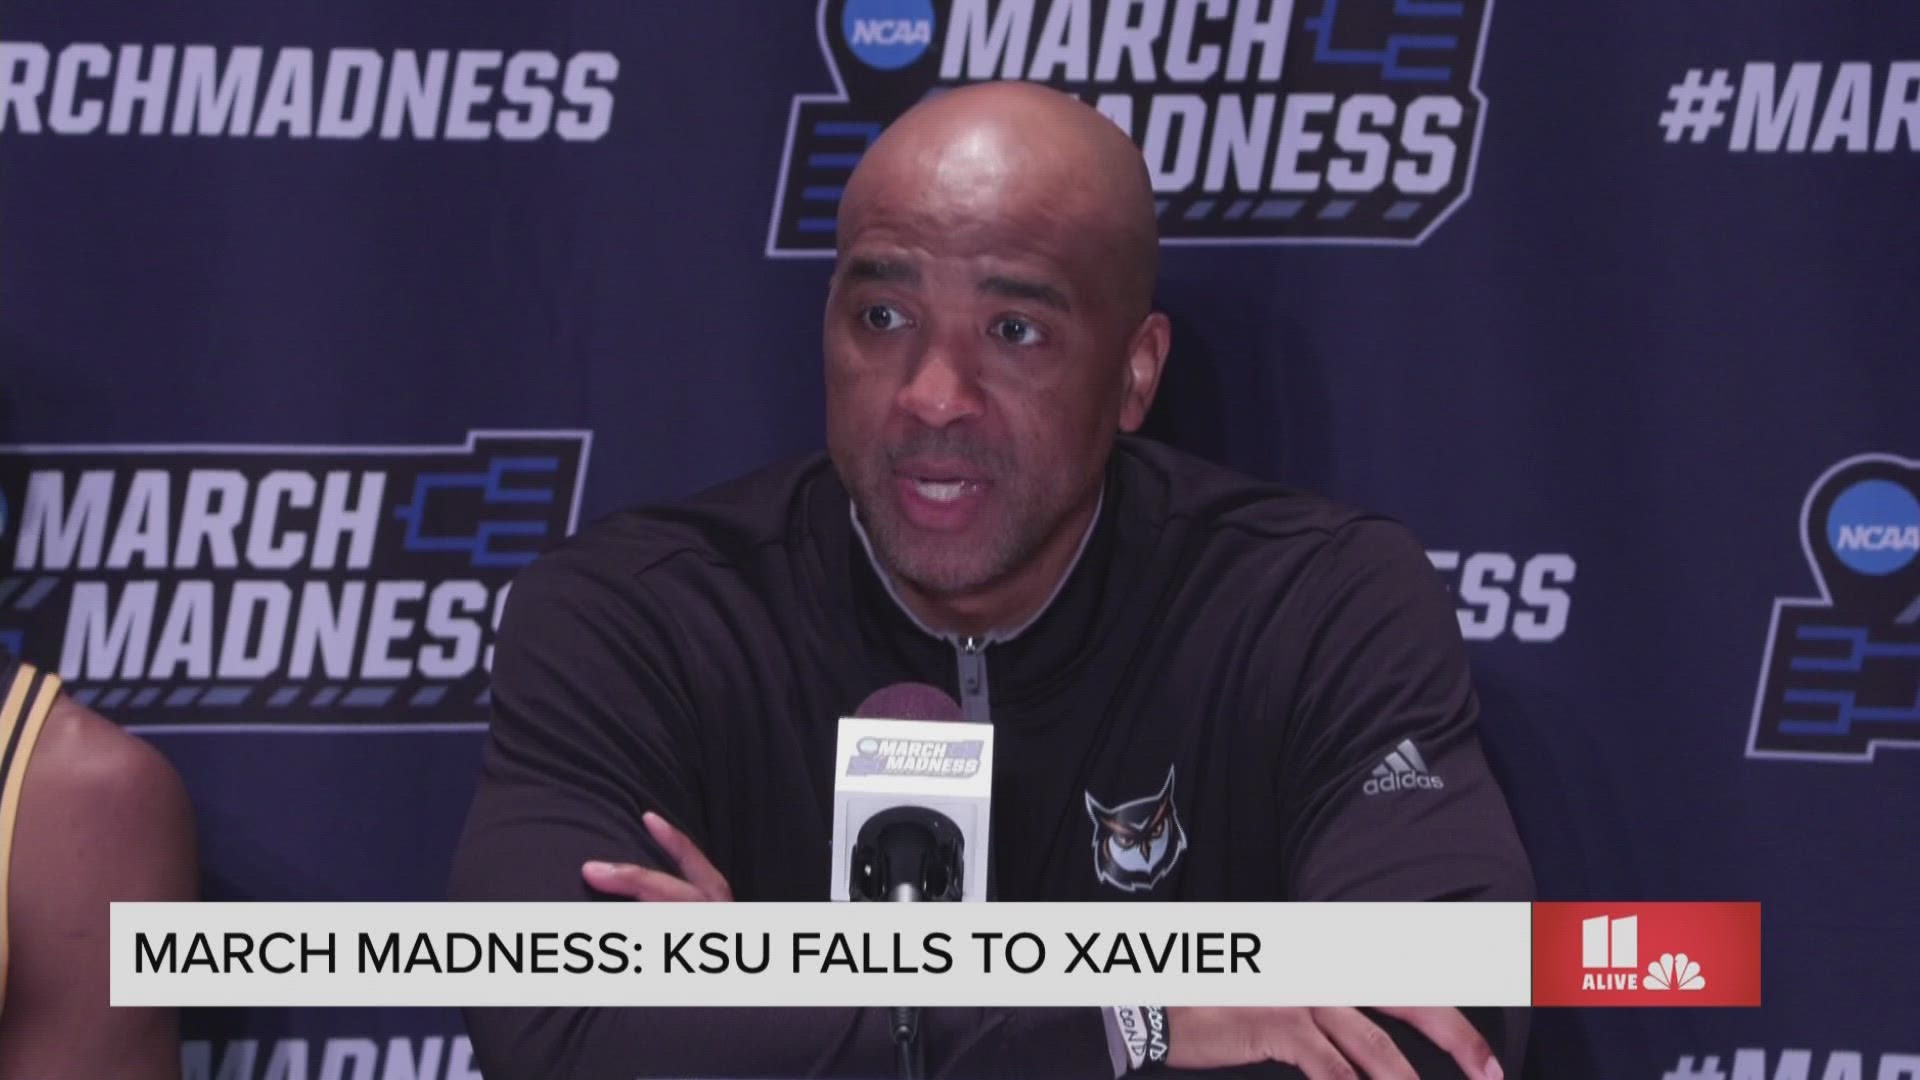 KSU coach Amir said that "today just wasn't their day," after the Owls fell 72-67 against Xavier.